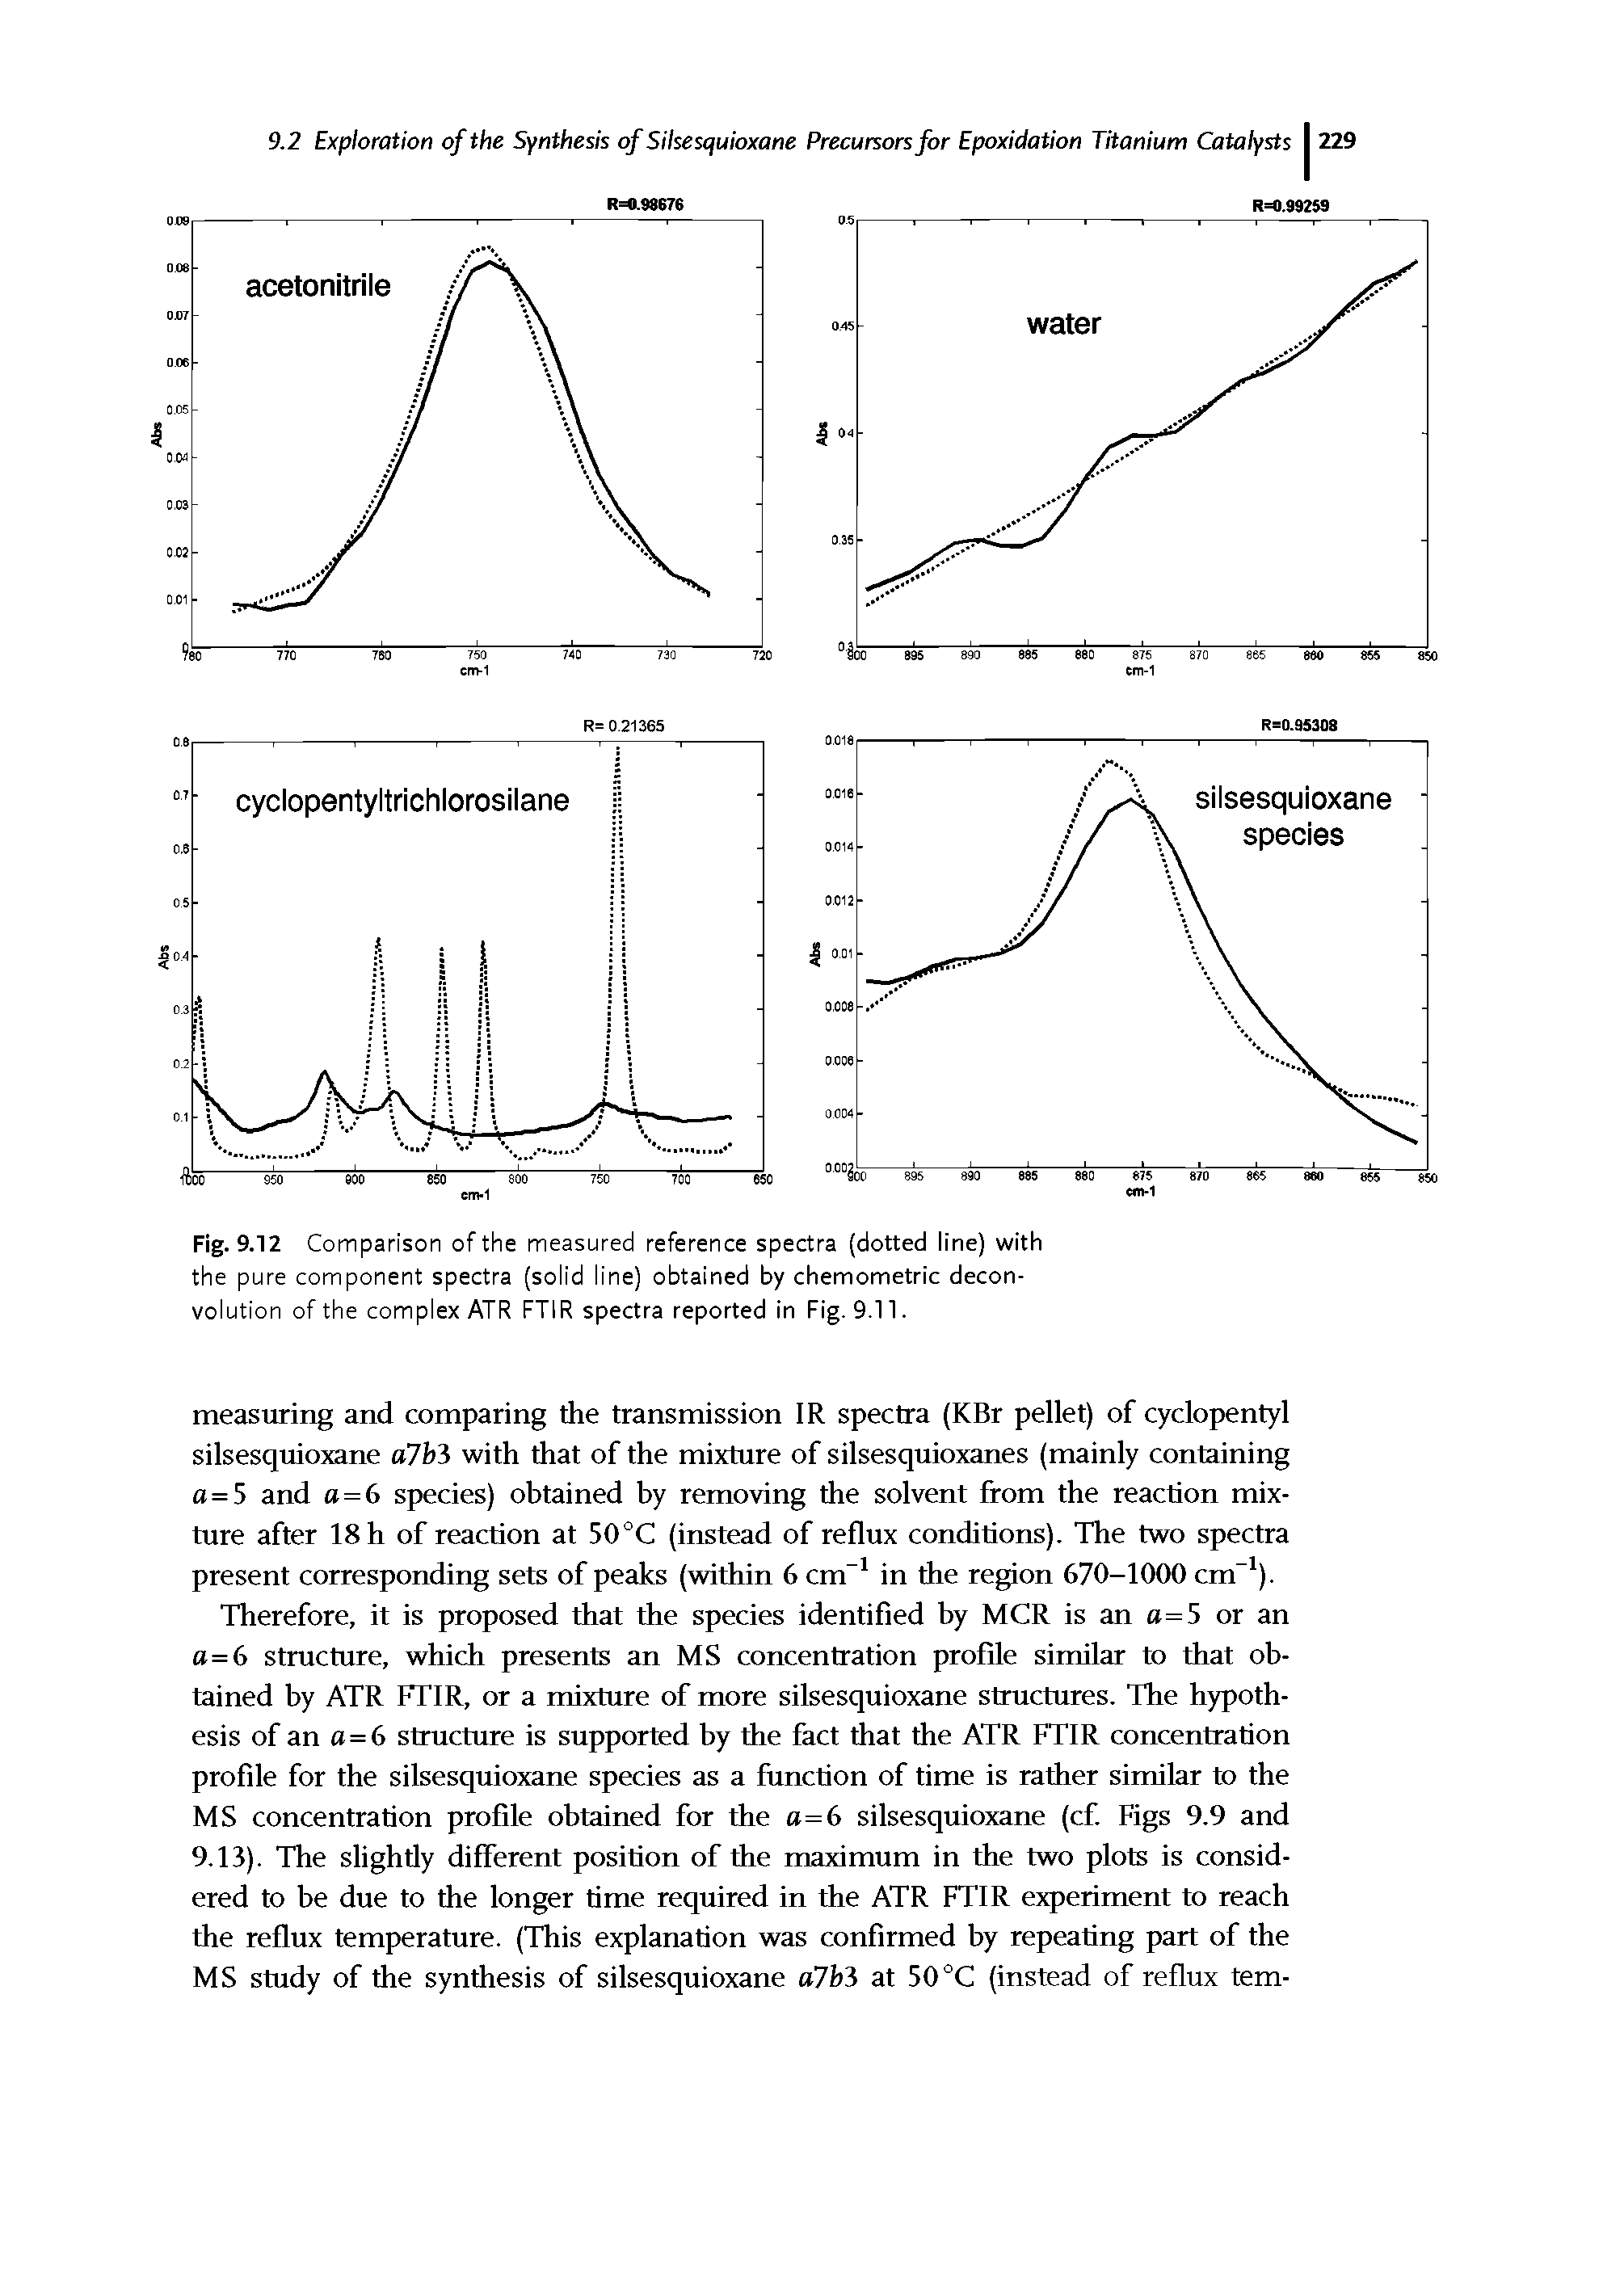 Fig. 9.12 Comparison of the measured reference spectra (dotted line) with the pure component spectra (solid line) obtained by chemometric deconvolution of the complex ATR FTIR spectra reported in Fig. 9.11.